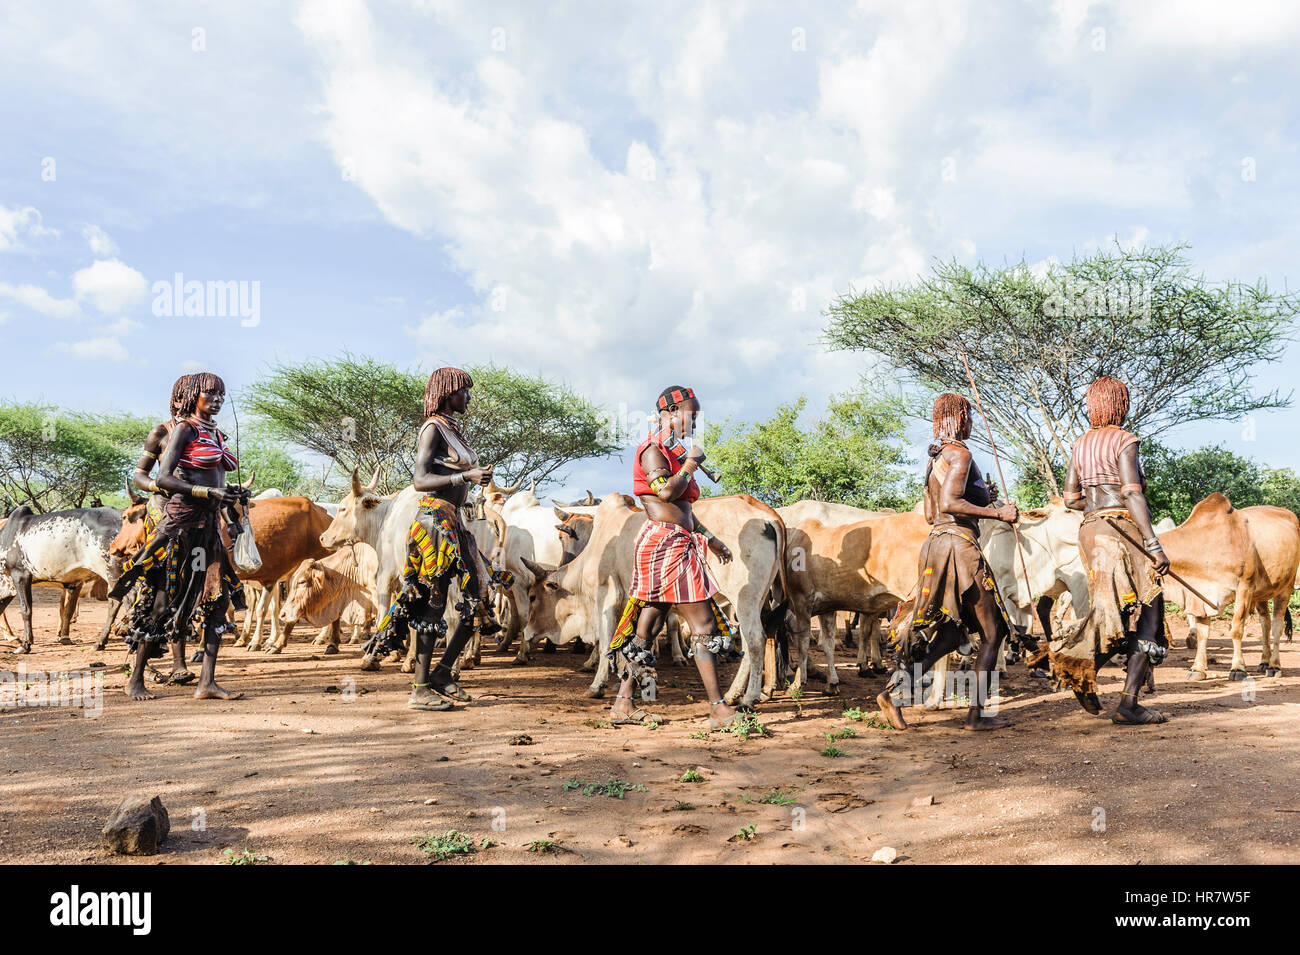 Women dancing around the cattle during a bull jumping ceremony. A rite of passage from boys to men rom the Hamer tribe. Stock Photo